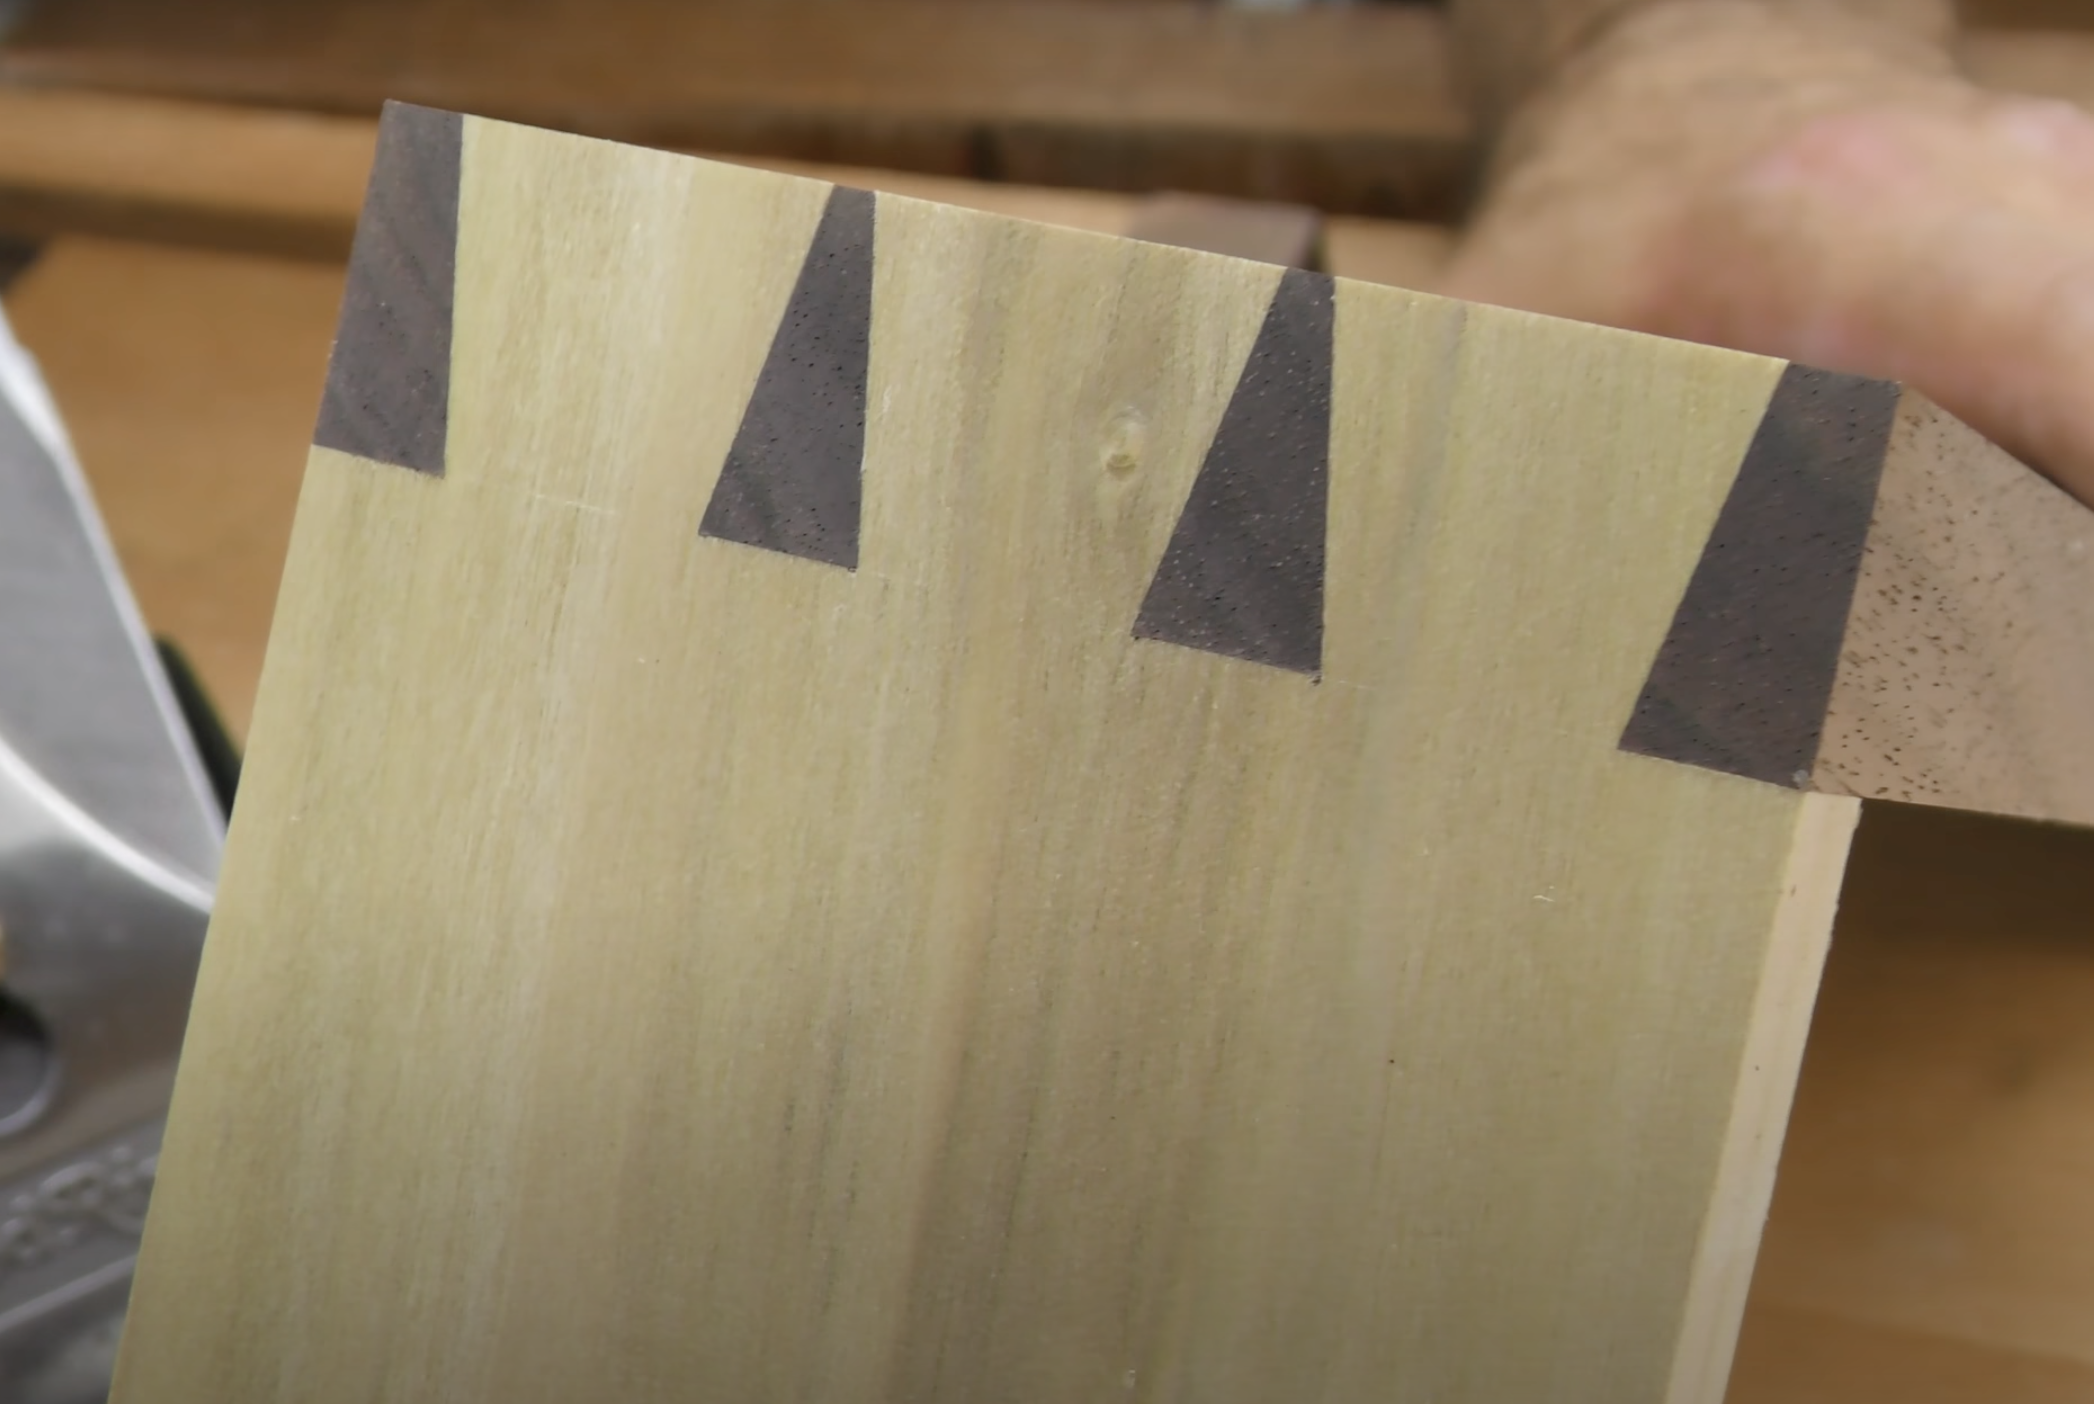 types of dovetail joints